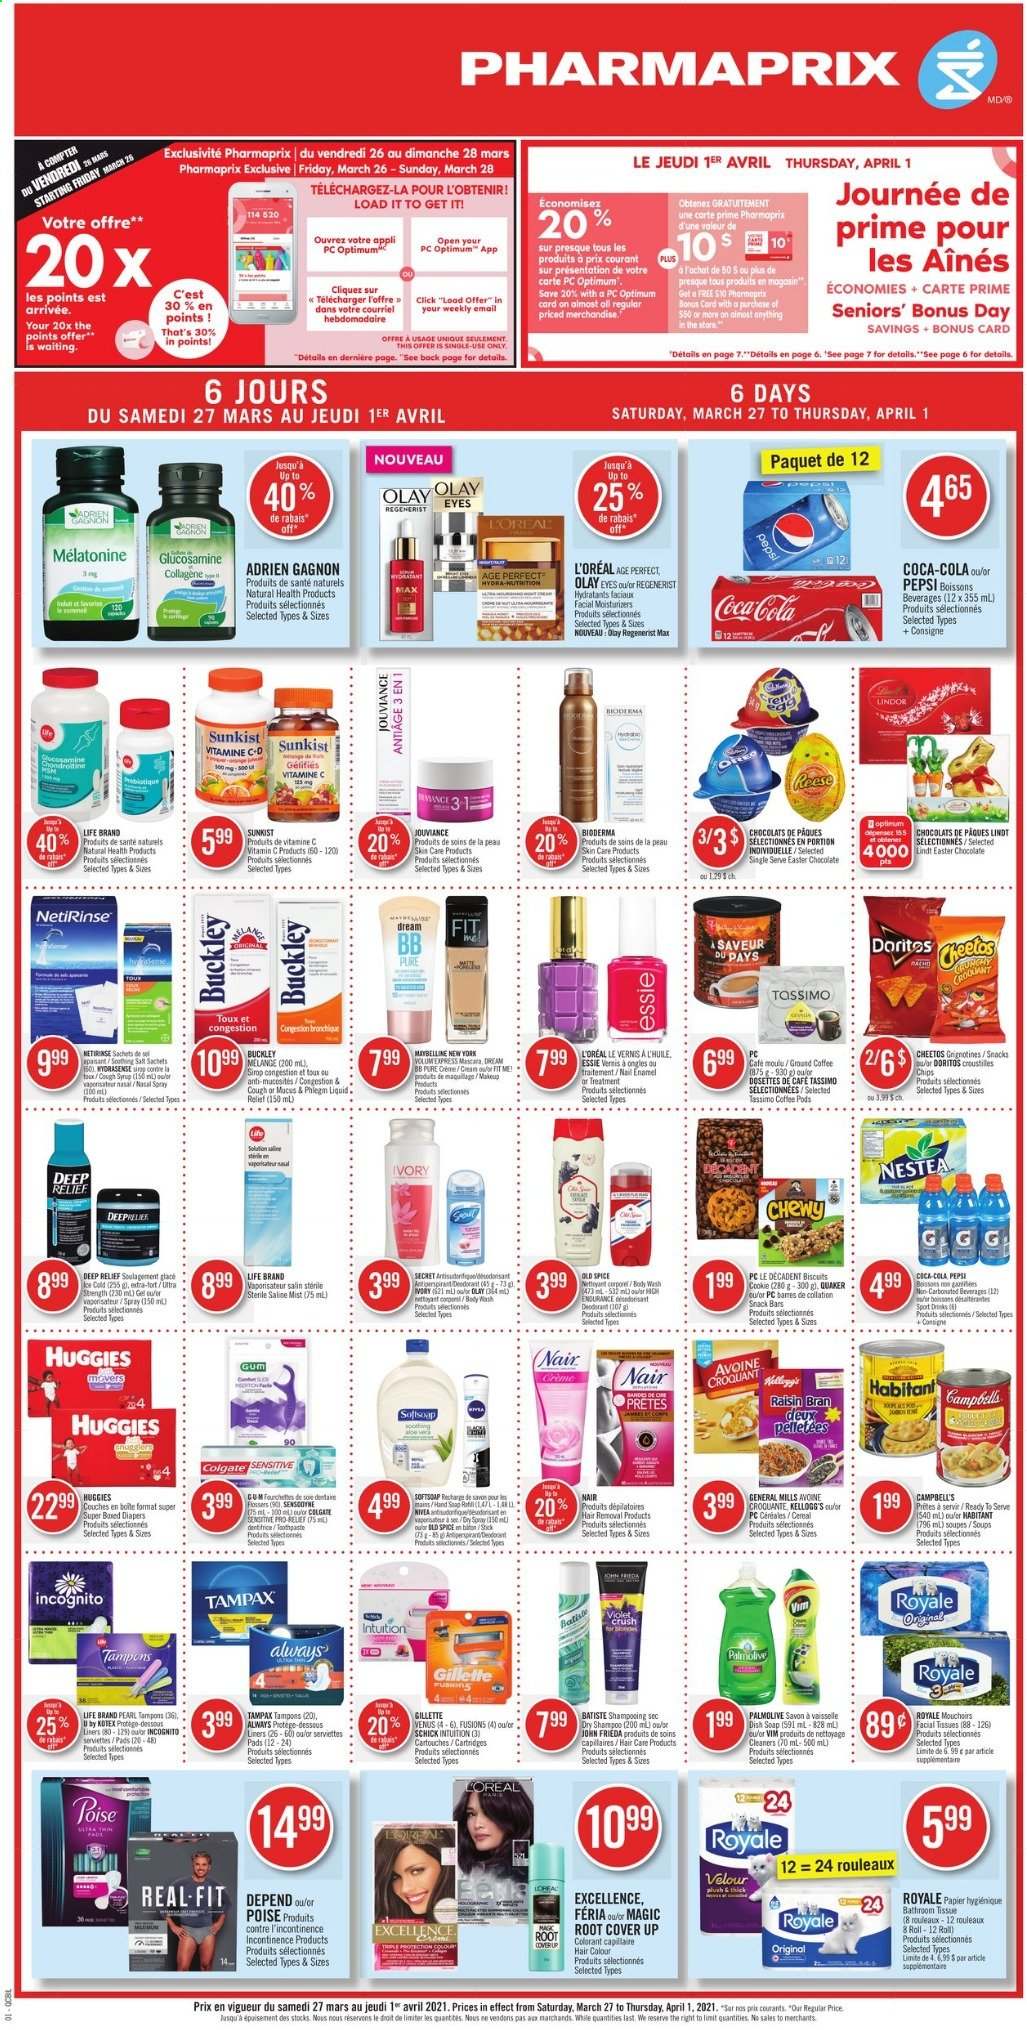 thumbnail - Pharmaprix Flyer - March 27, 2021 - April 01, 2021 - Sales products - Campbell's, Quaker, chocolate, snack, Mars, Kellogg's, biscuit, snack bar, Doritos, Cheetos, cereals, Raisin Bran, spice, syrup, Coca-Cola, Pepsi, coffee pods, ground coffee, nappies, bath tissue, Palmolive, soap, toothpaste, Kotex, tampons, facial tissues, L’Oréal, moisturizer, Olay, hair color, John Frieda, anti-perspirant, Schick, Venus, hair removal, nail enamel, glucosamine, vitamin c, nasal spray, Gillette, mascara, Maybelline, shampoo, Tampax, Huggies, Nivea, Old Spice, chips, deodorant. Page 1.